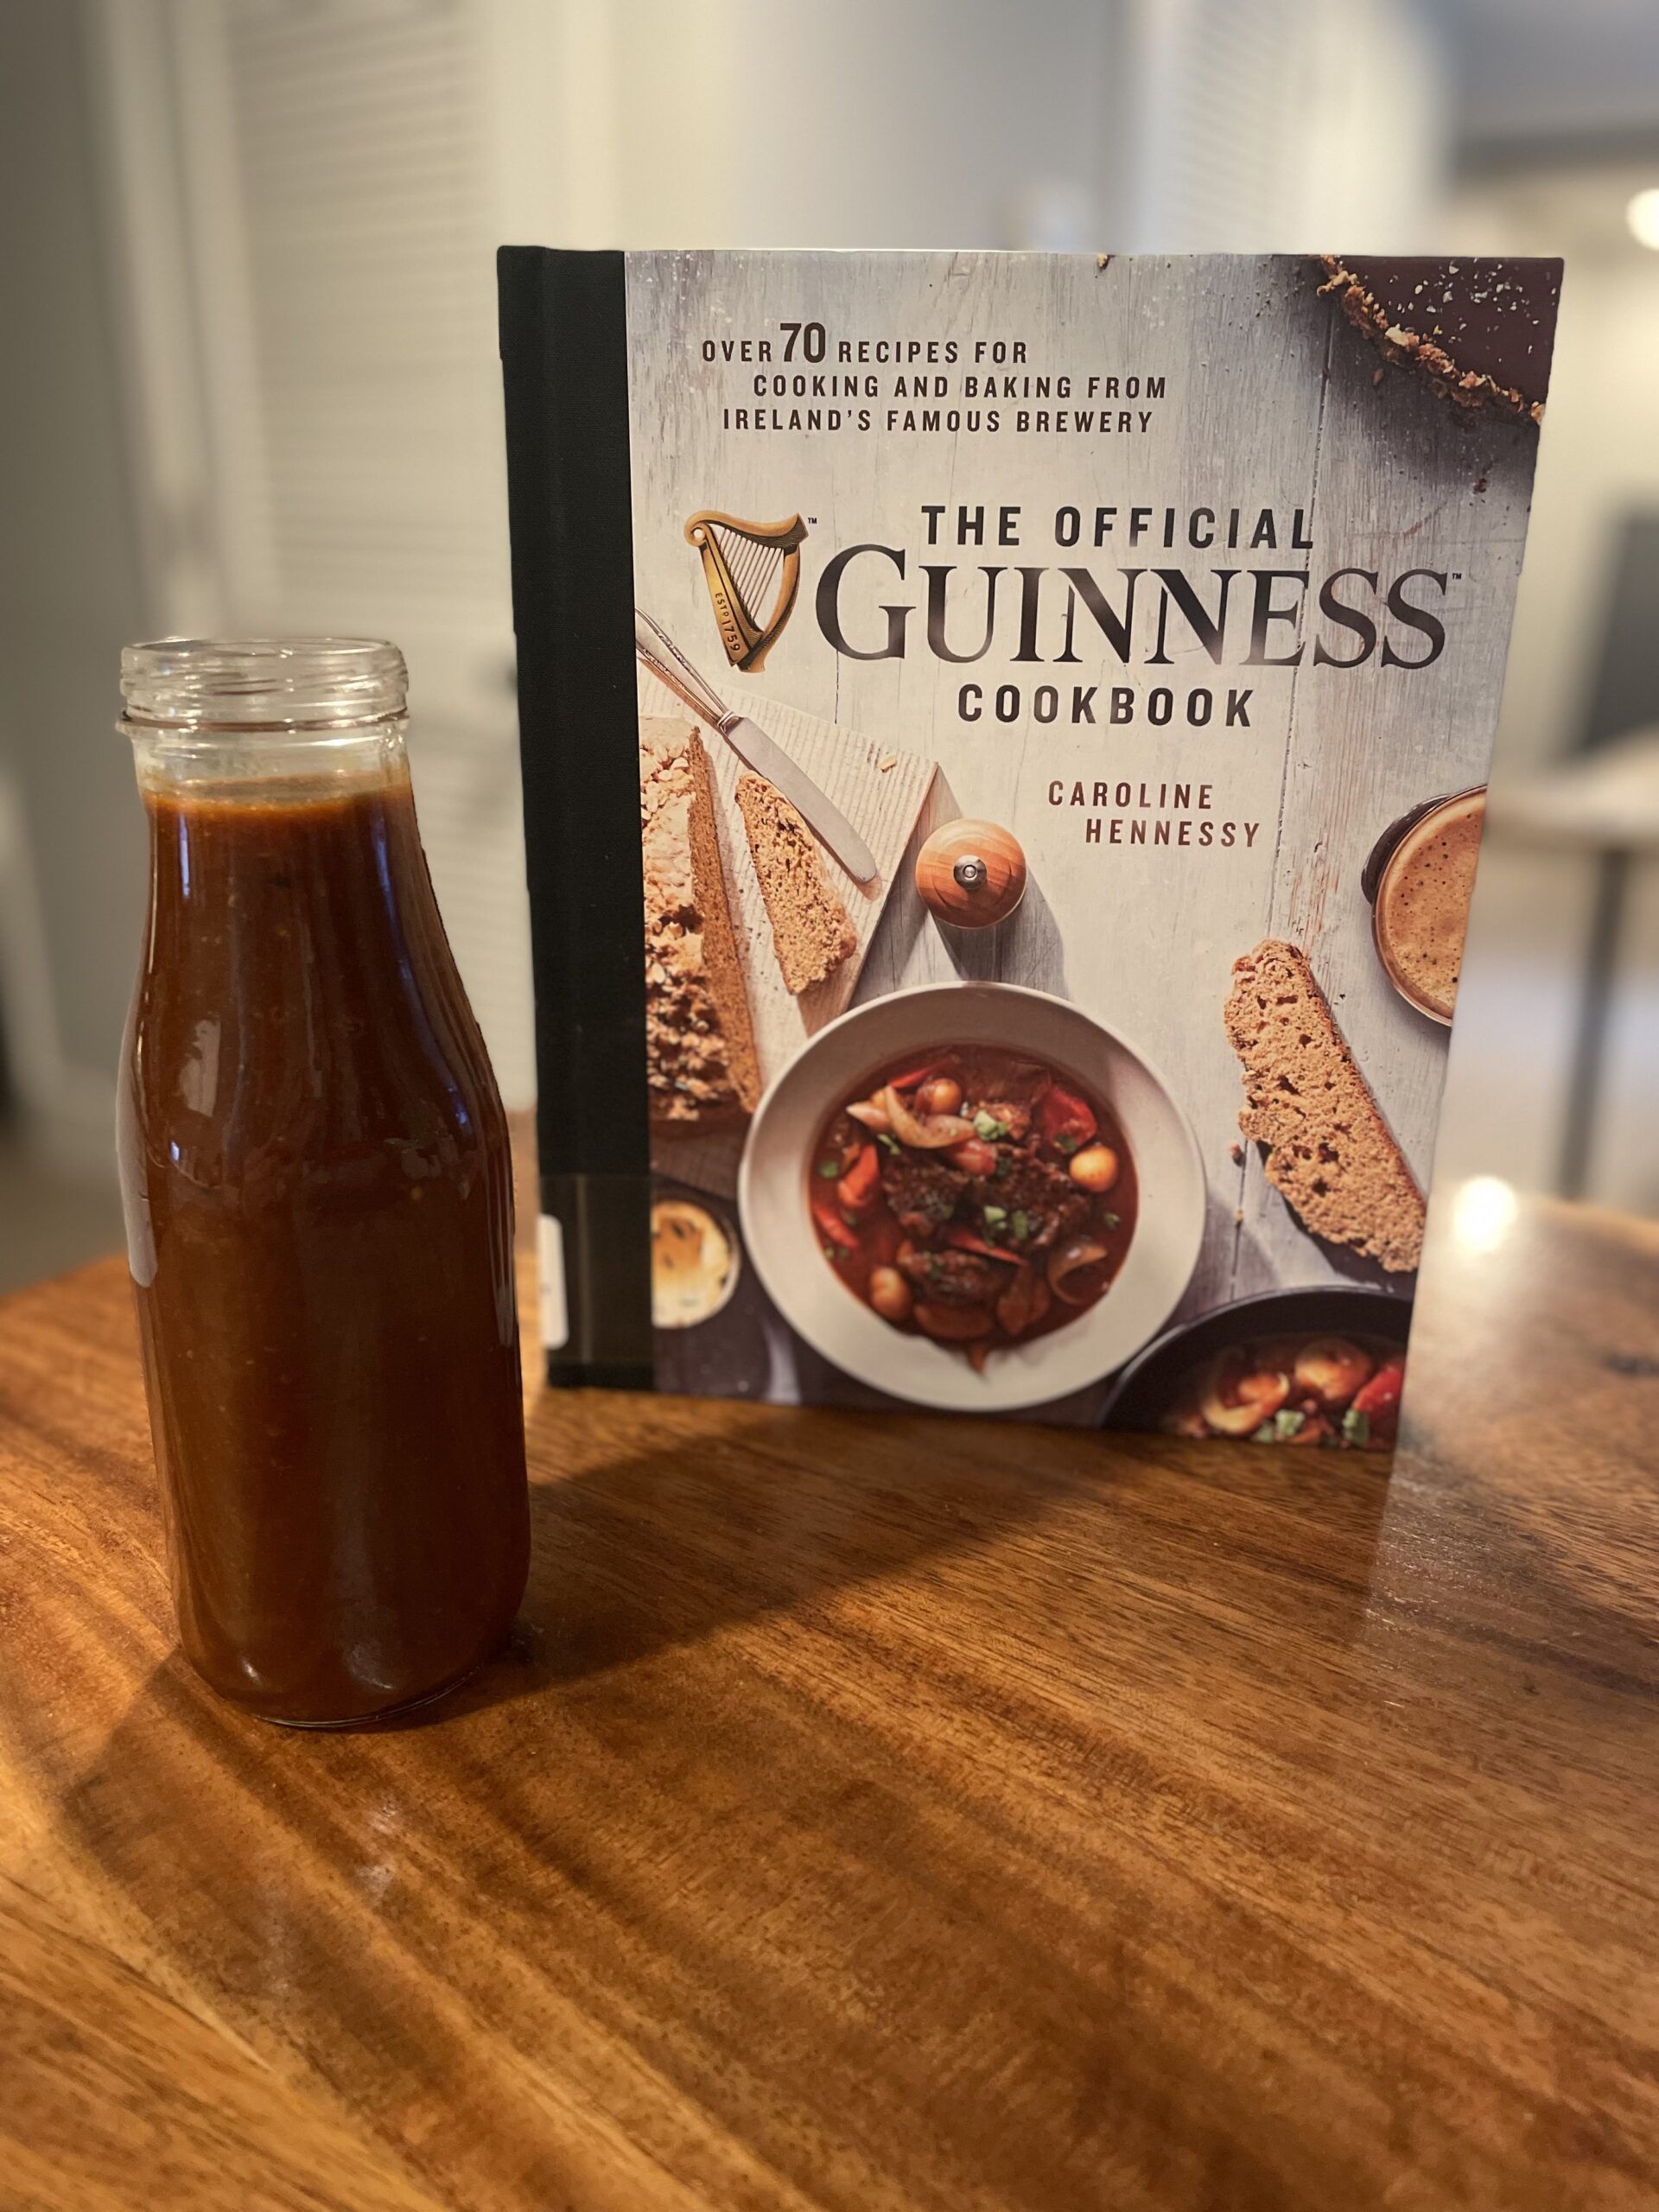 Image of The Official Guinness Cookbook next to a tall glass jar of dark brownish red BBQ sauce